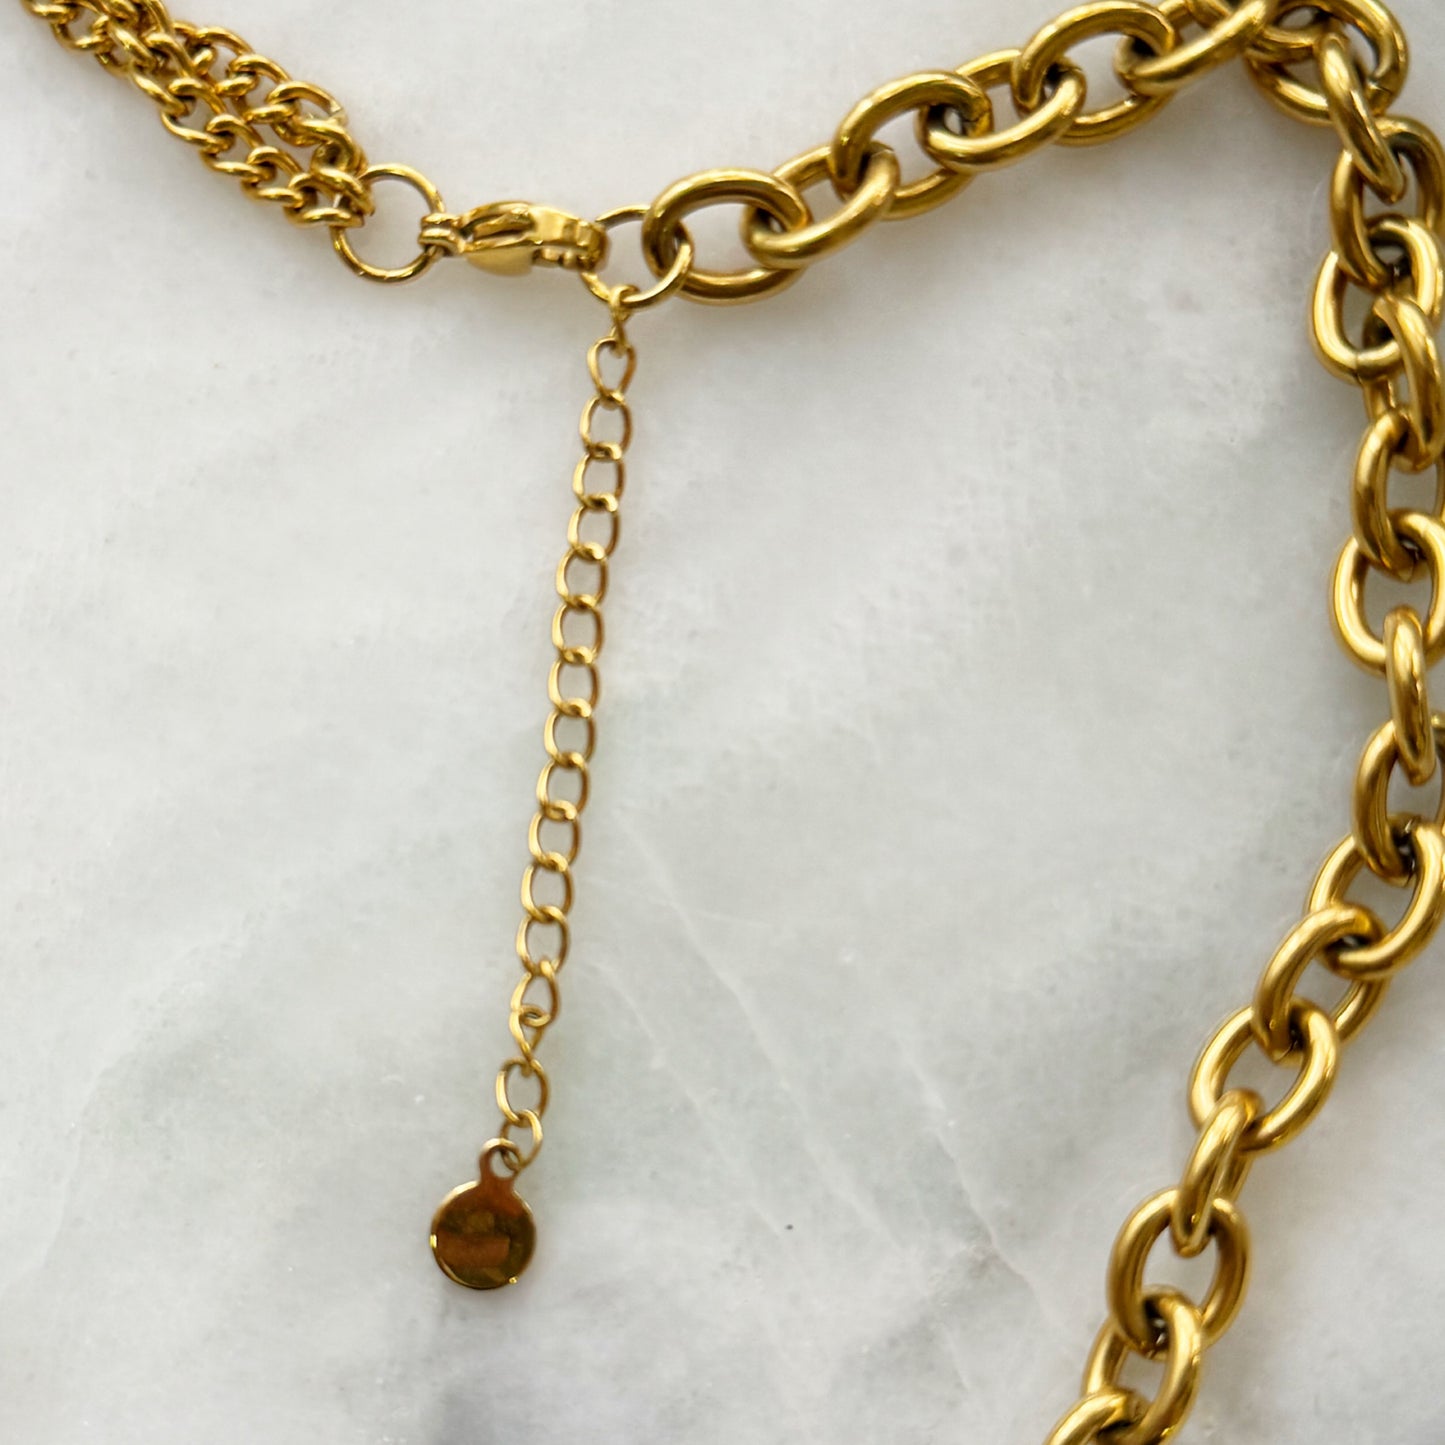 Linked Chains Necklace